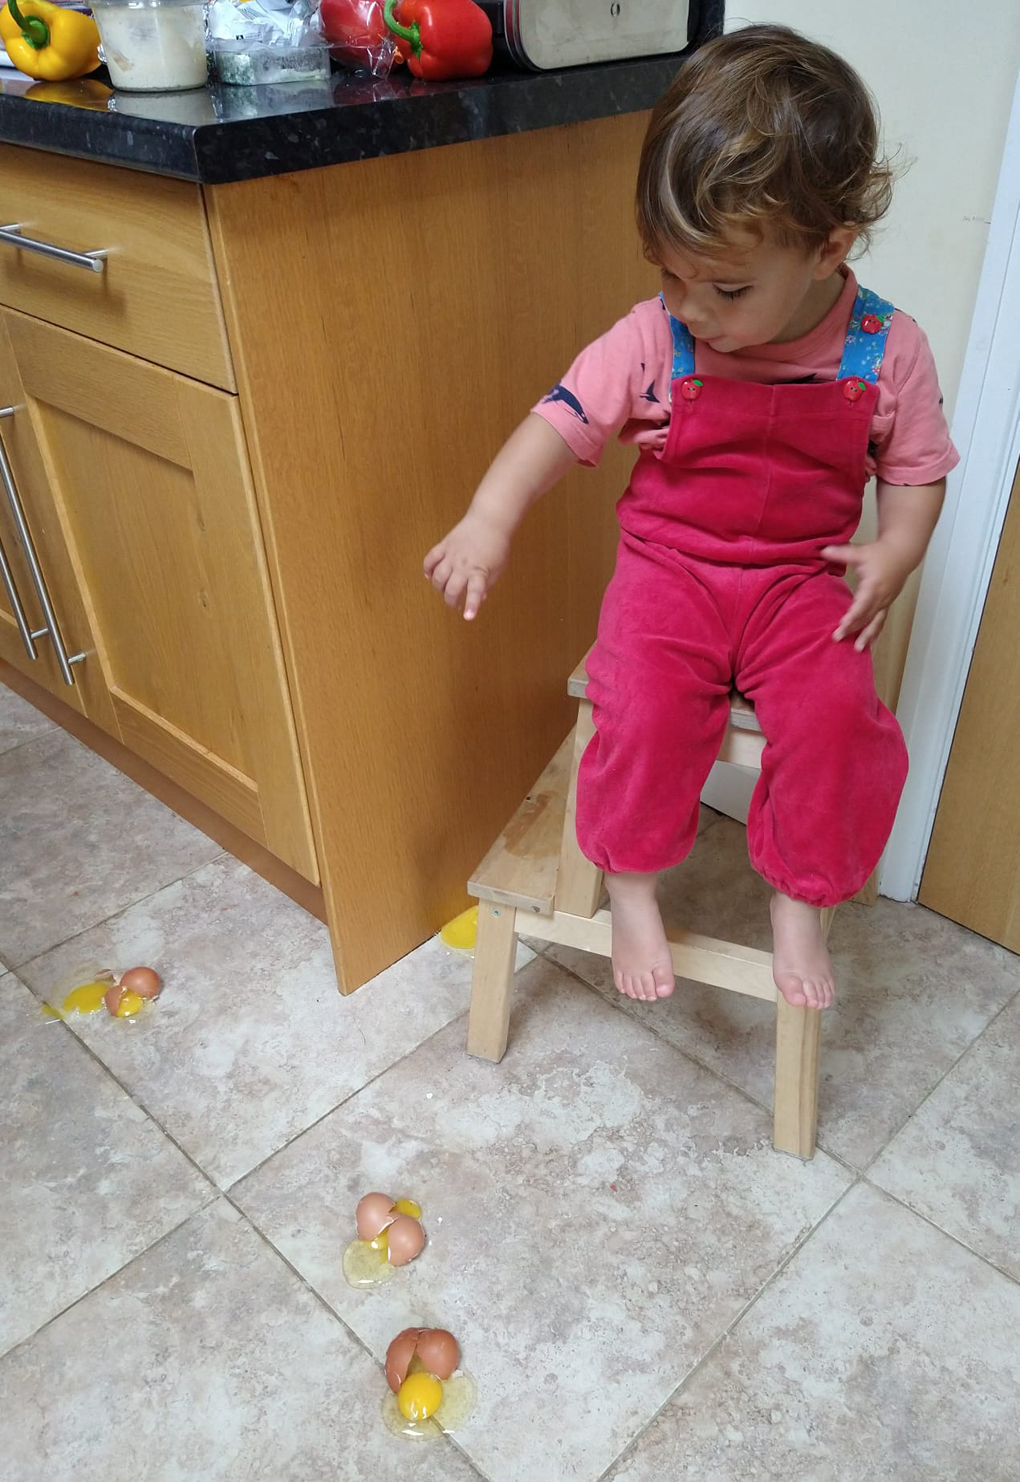 Toddler throwing eggs on the kitchen floor